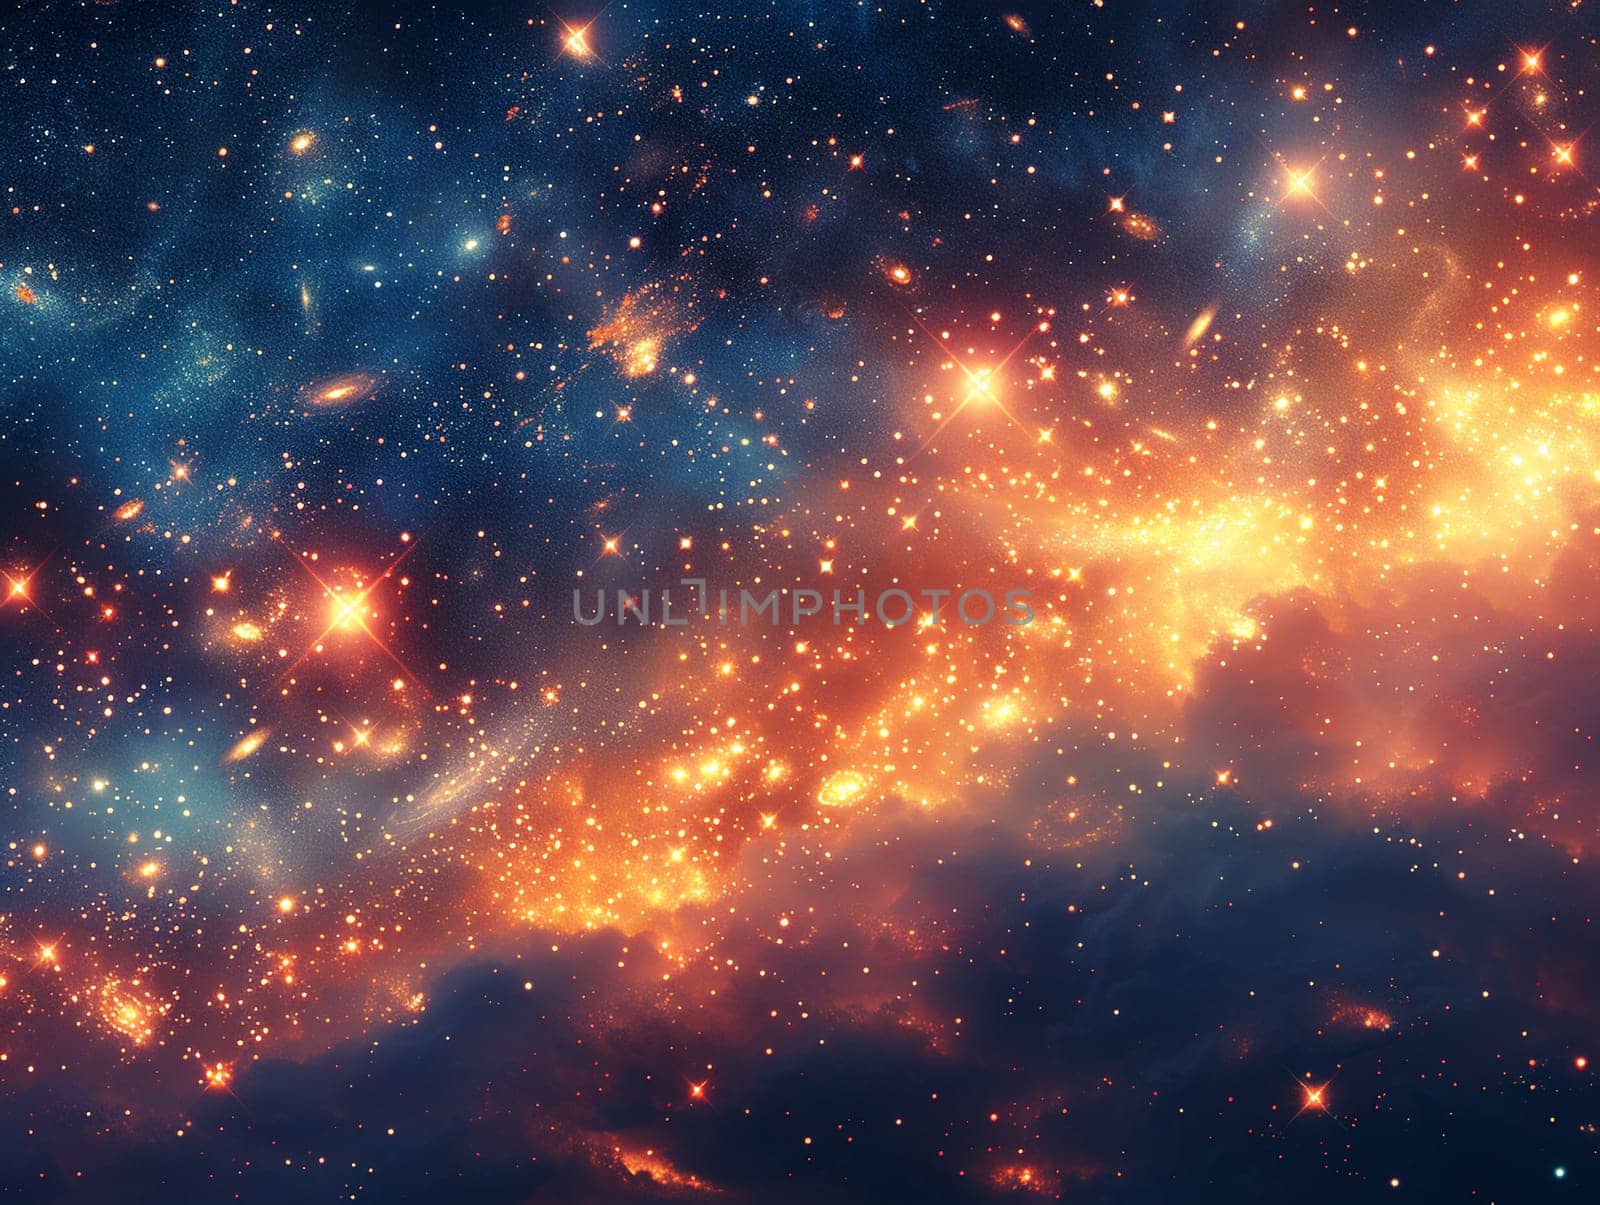 Pixelated Stars and Galaxies for a Space Exploration Game, The cosmos blur into dots of light, a pixel universe awaiting discovery.